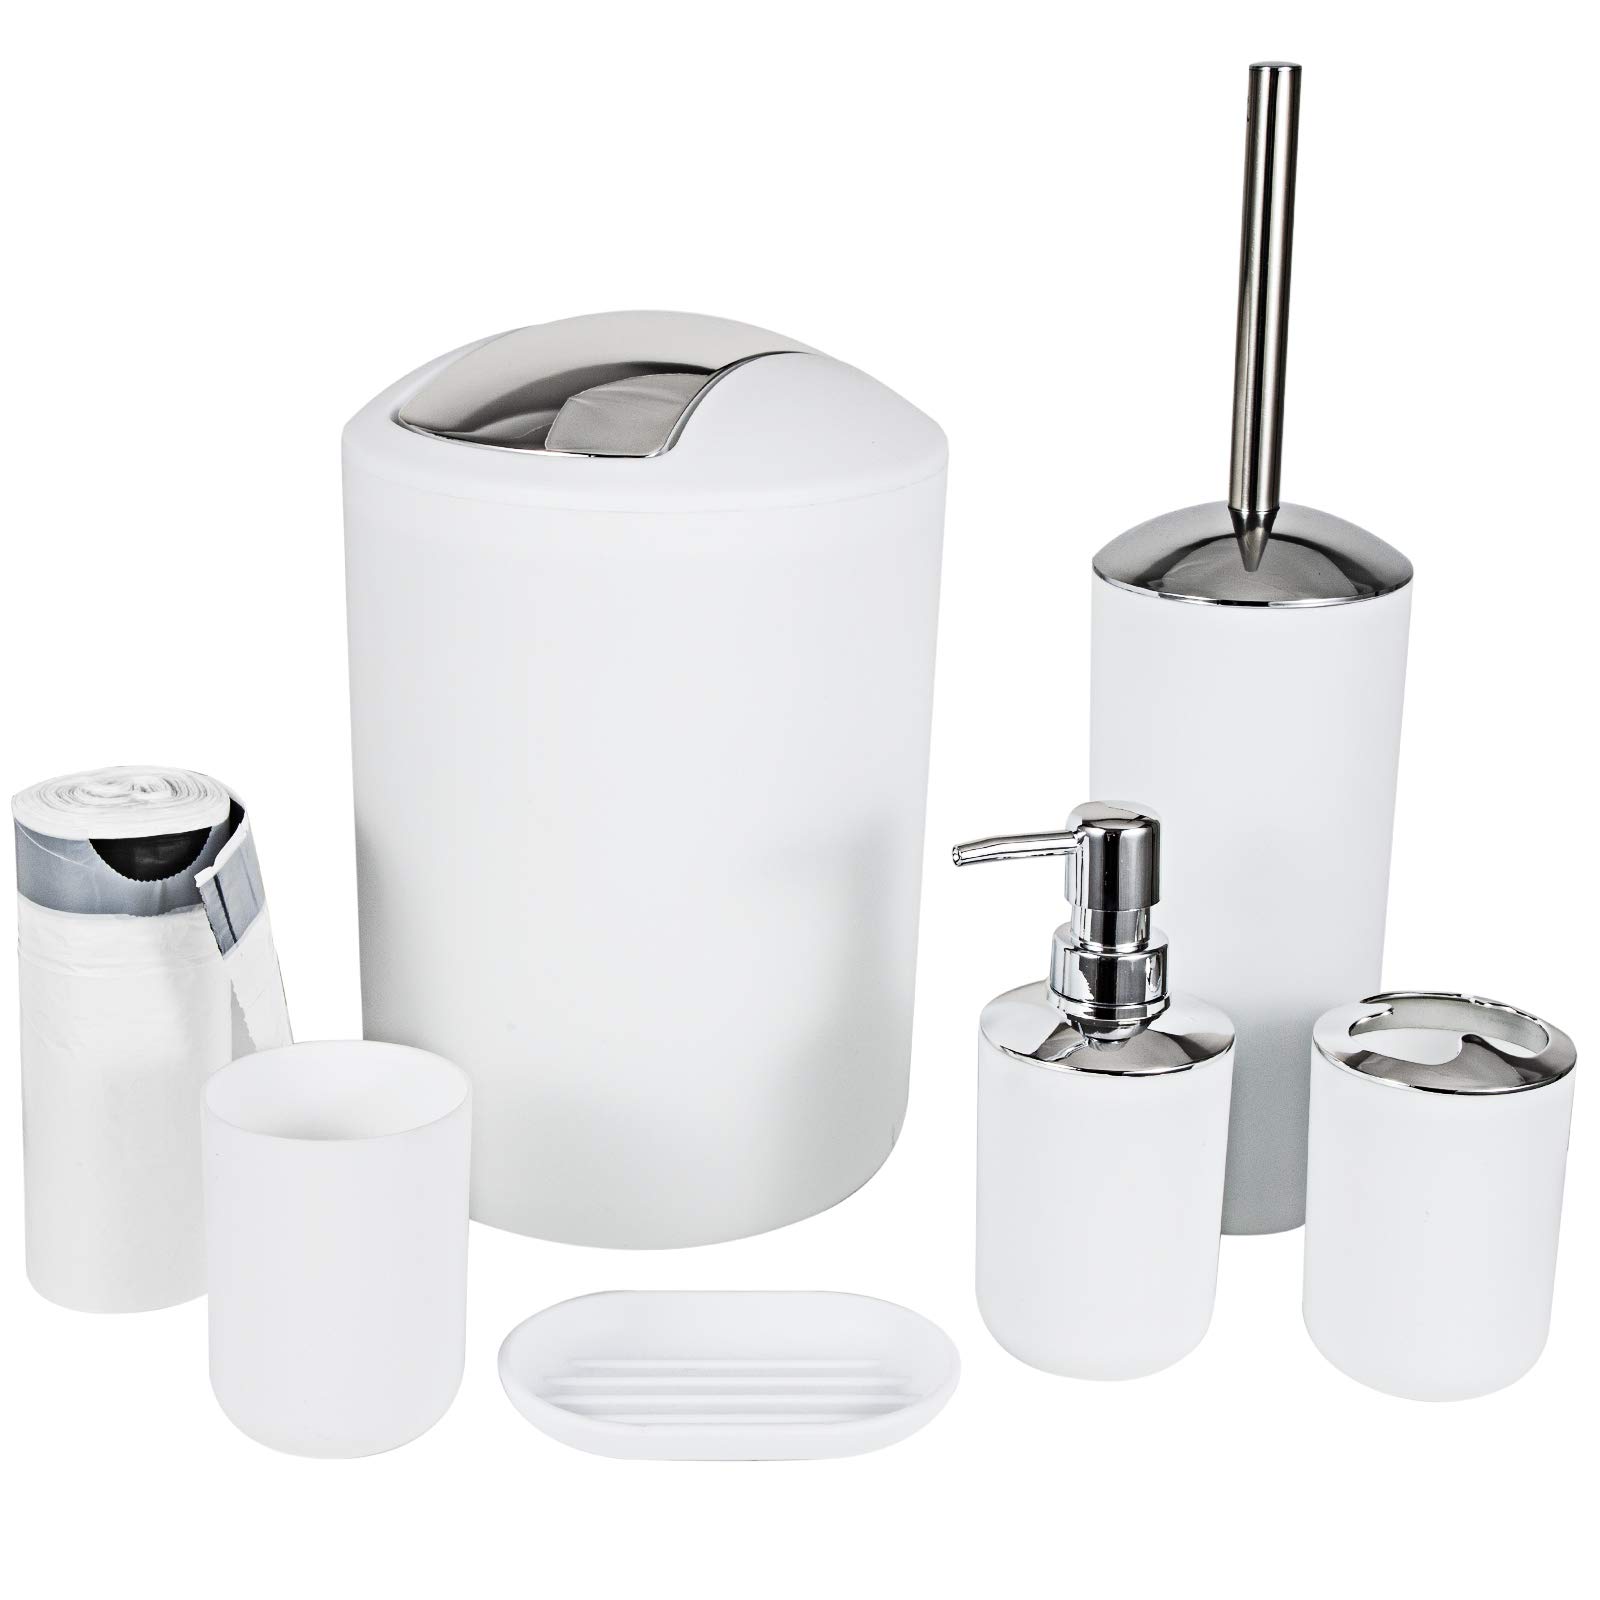 Book Cover 6 Piece Bathroom Accessories Sets,Bathroom Set 6 Pieces Plastic Lotion Dispenser,Toothbrush Holder,Bathroom Tumblers,Soap Dish,Trash Can,Toilet Brush Set with Drawstring Trash Bags (White)